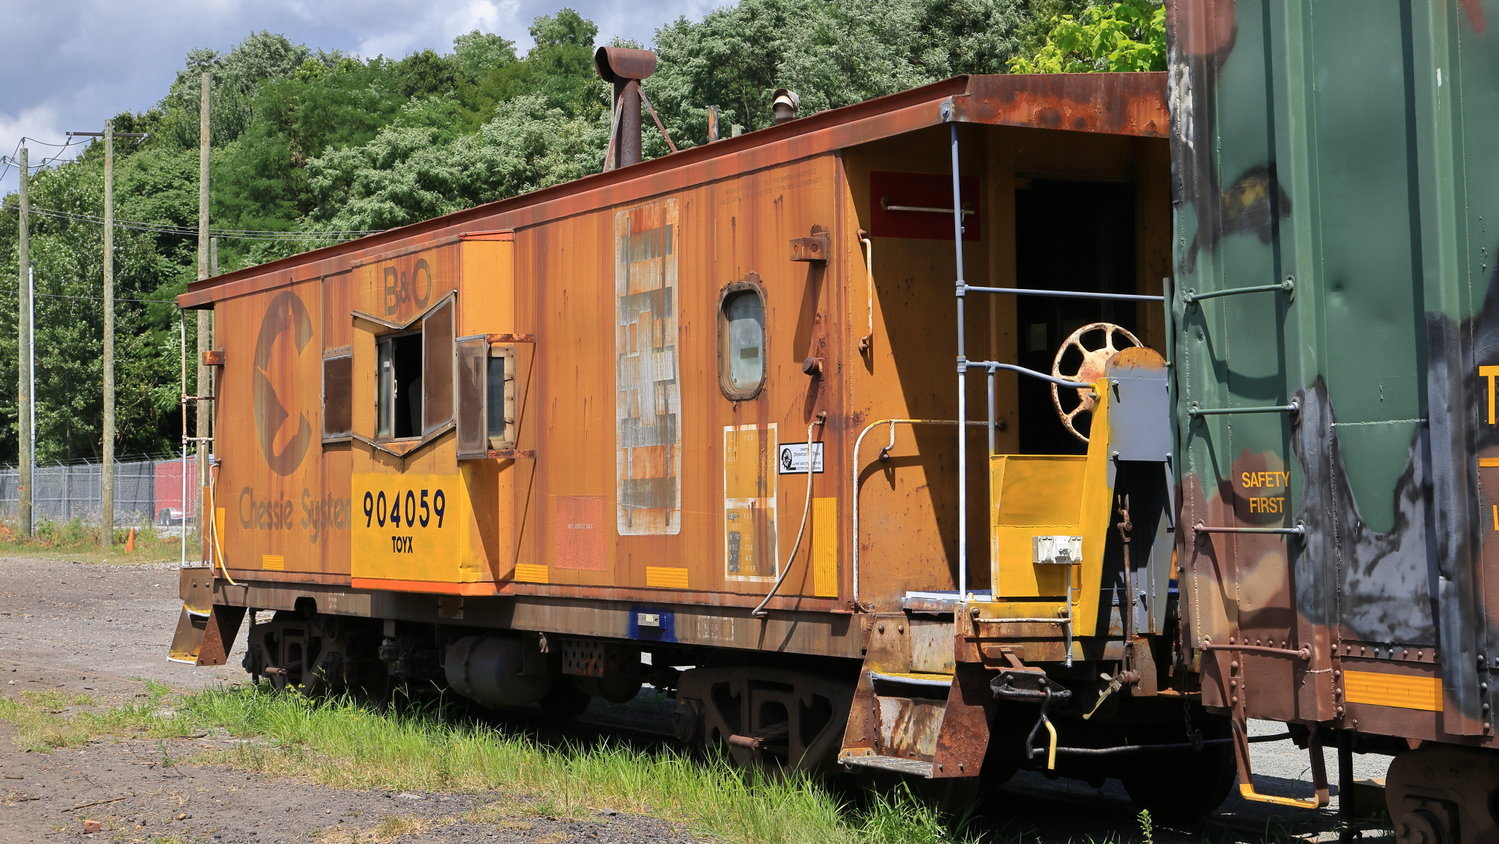 Caboose No. 904059 was built in September of 1980 and is the “youngest” railcar at the Port Jervis Transportation History Center. Still displaying the original paint, this fully operational caboose will be restored to its original, unfaded Chessie system colors. It will be displayed at Port Jervis and used on Operation Toy Train’s annual Toys for Tots collection trains for additional volunteer capacity.